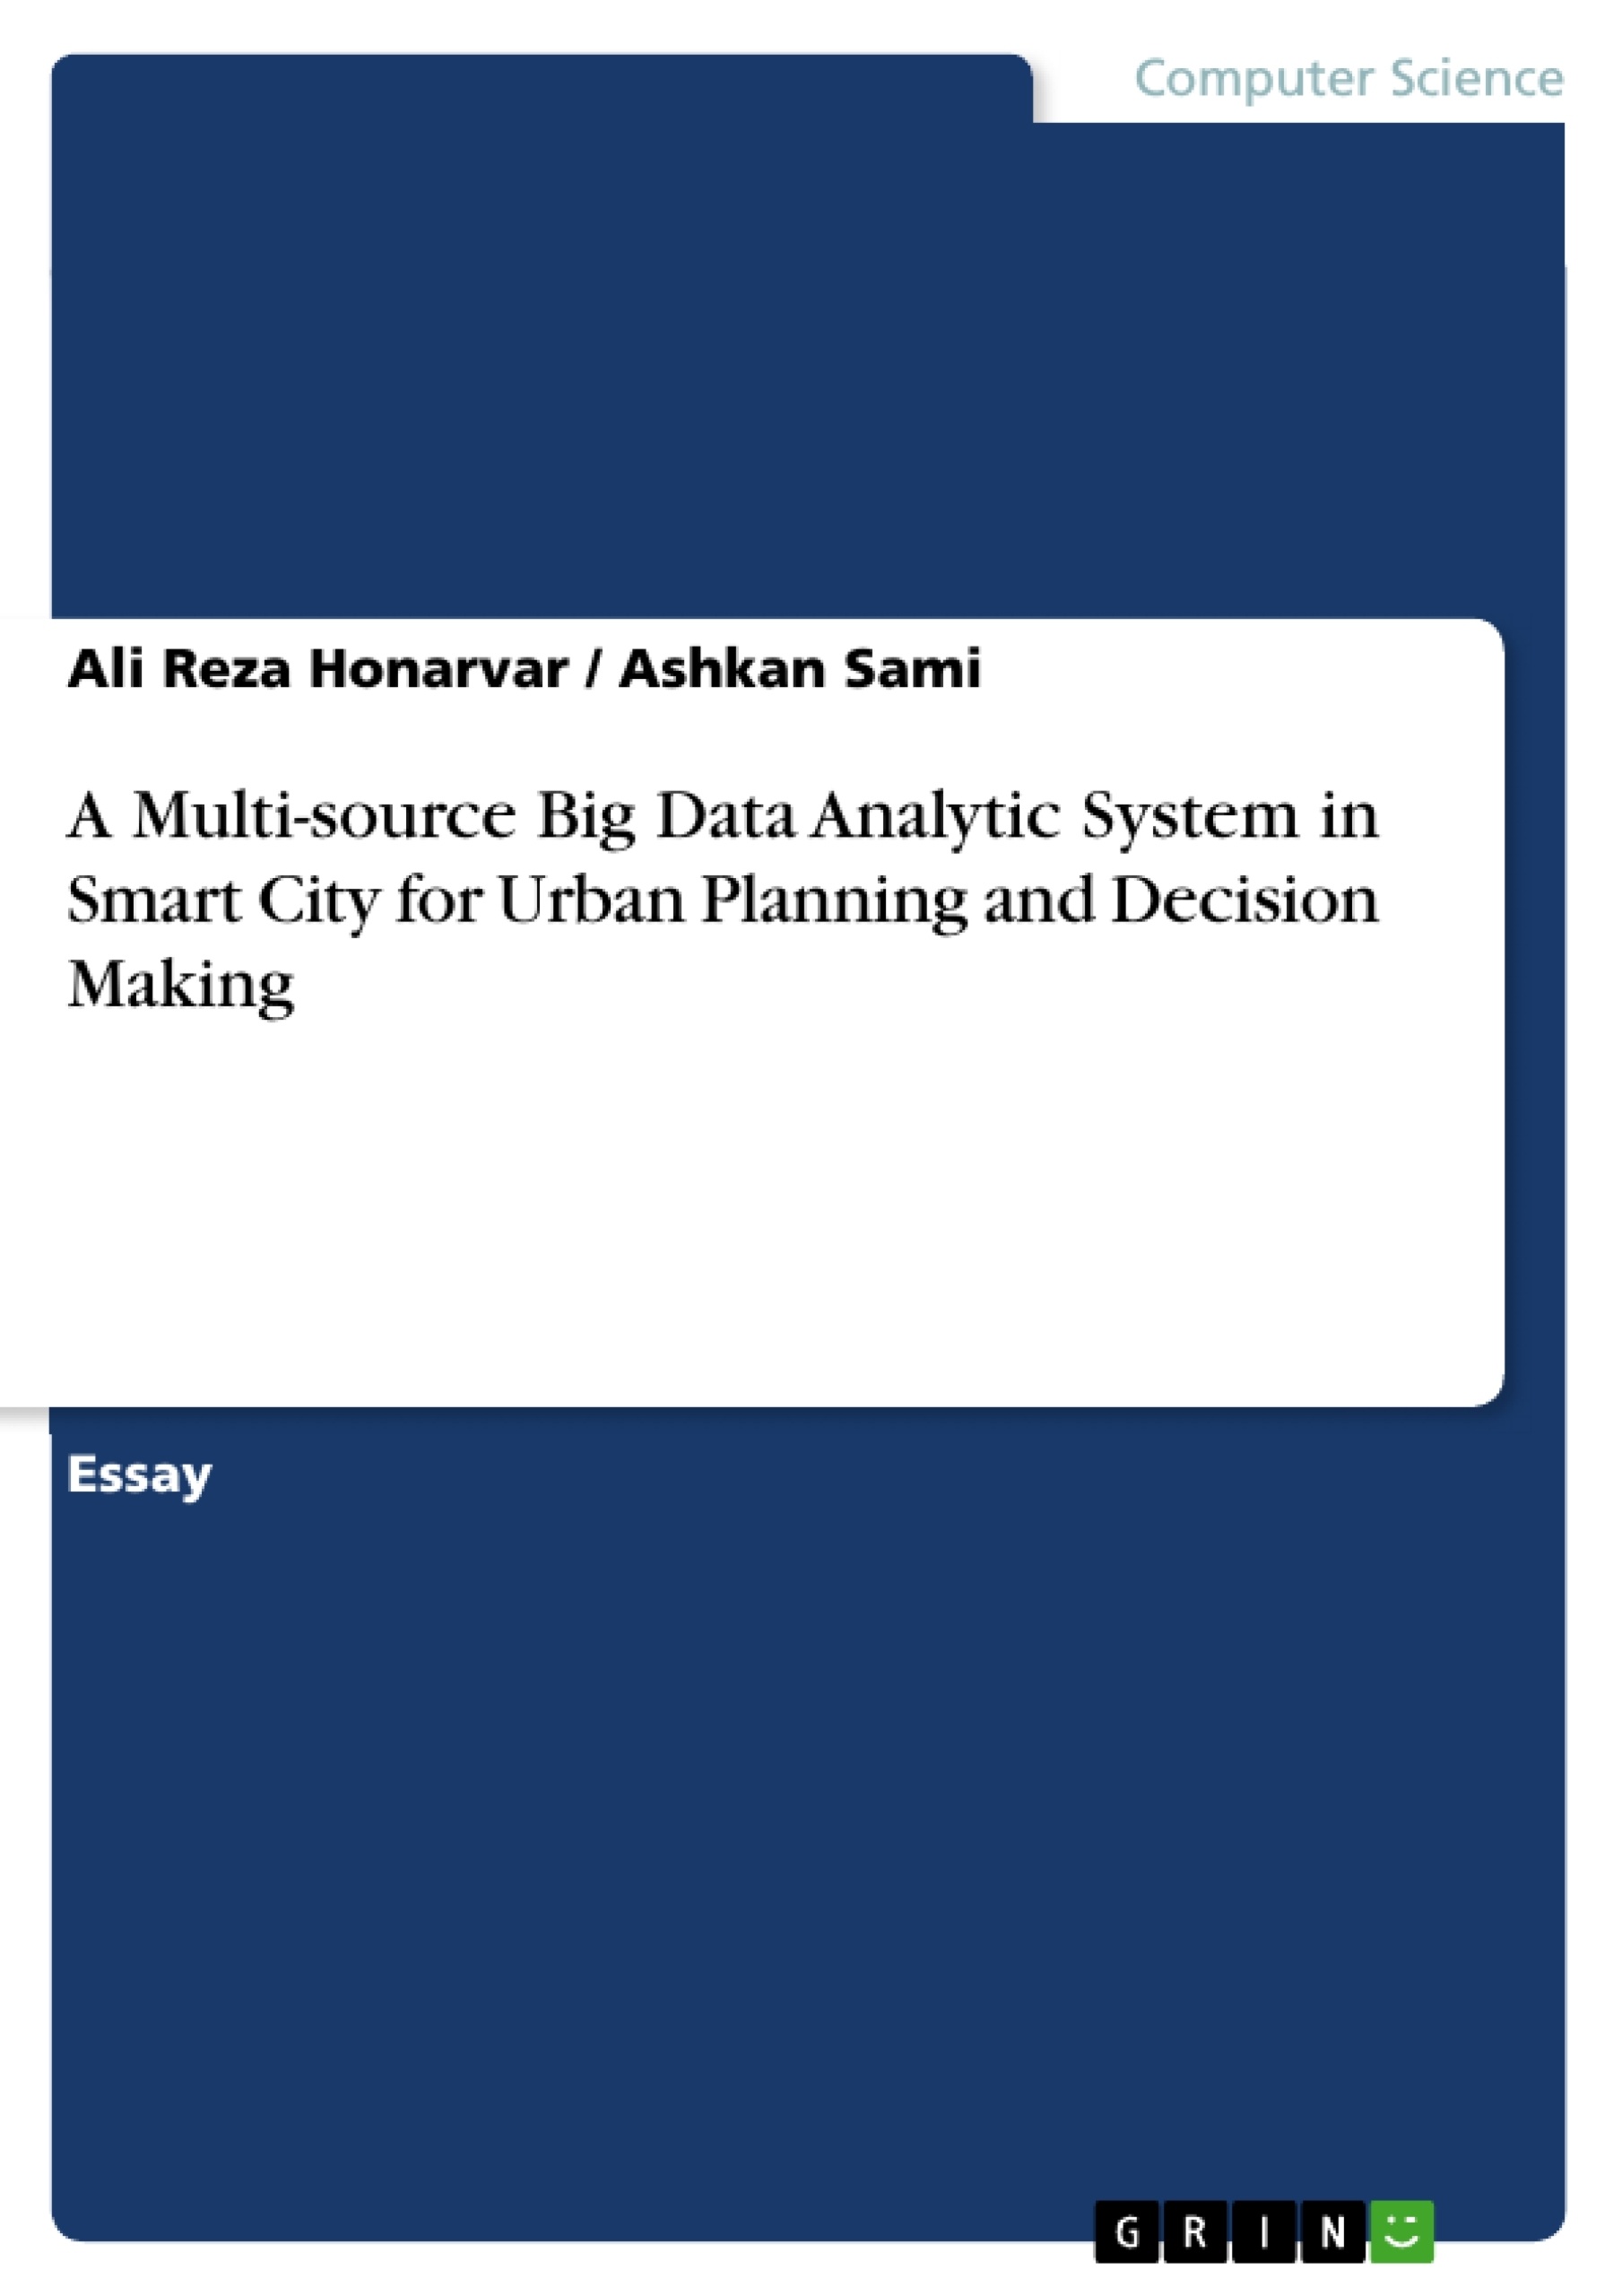 Title: A Multi-source Big Data Analytic System in Smart City for Urban Planning and Decision Making